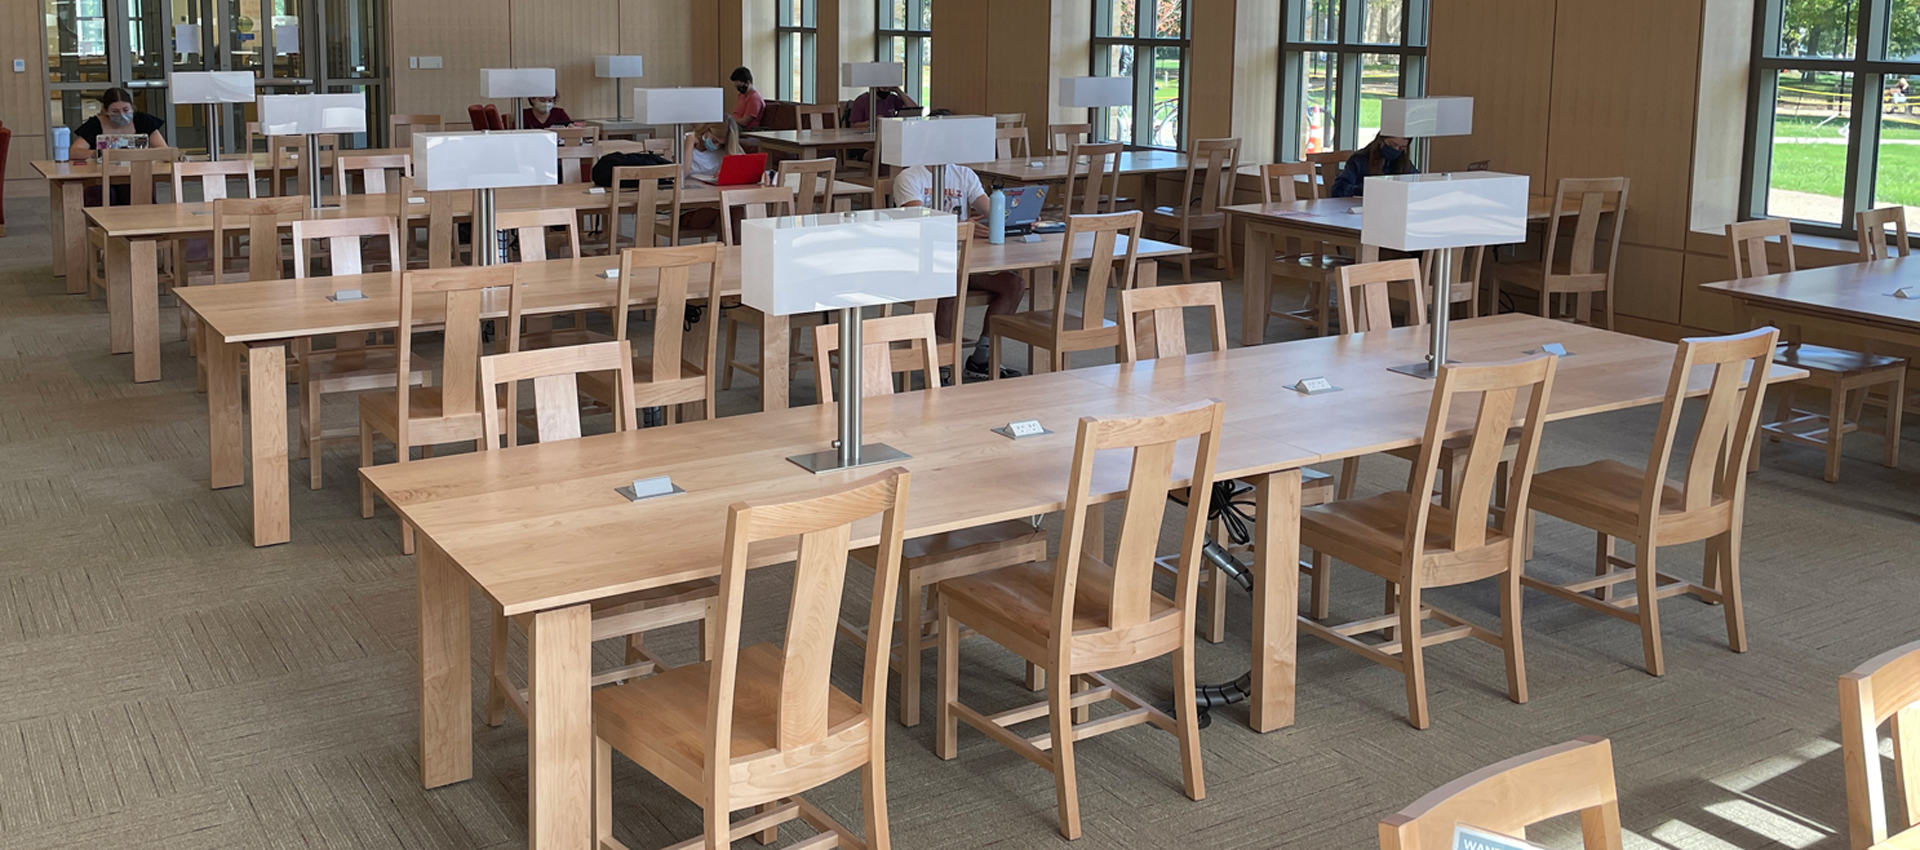 wood library chairs and study tables with access to power and integrated lighting, transitional wood style